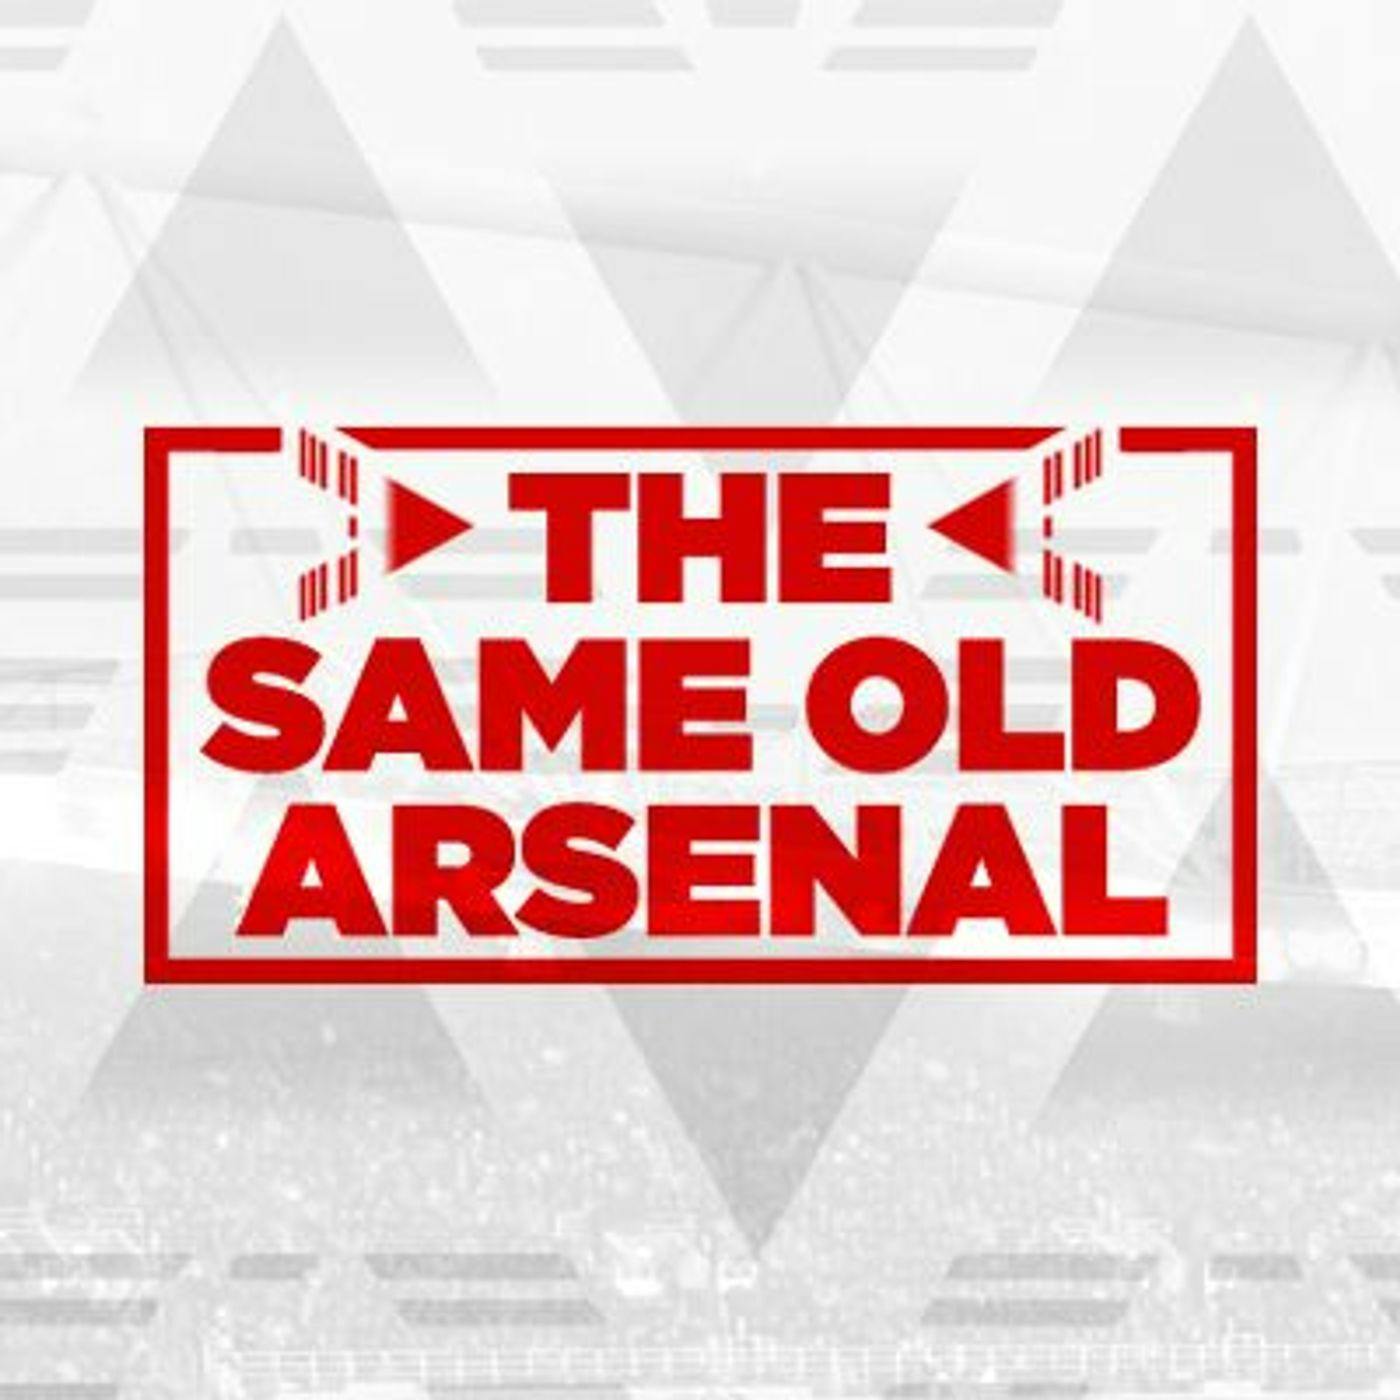 Southampton 1 - 0 Arsenal | We Are Out Out | The Same Old Arsenal